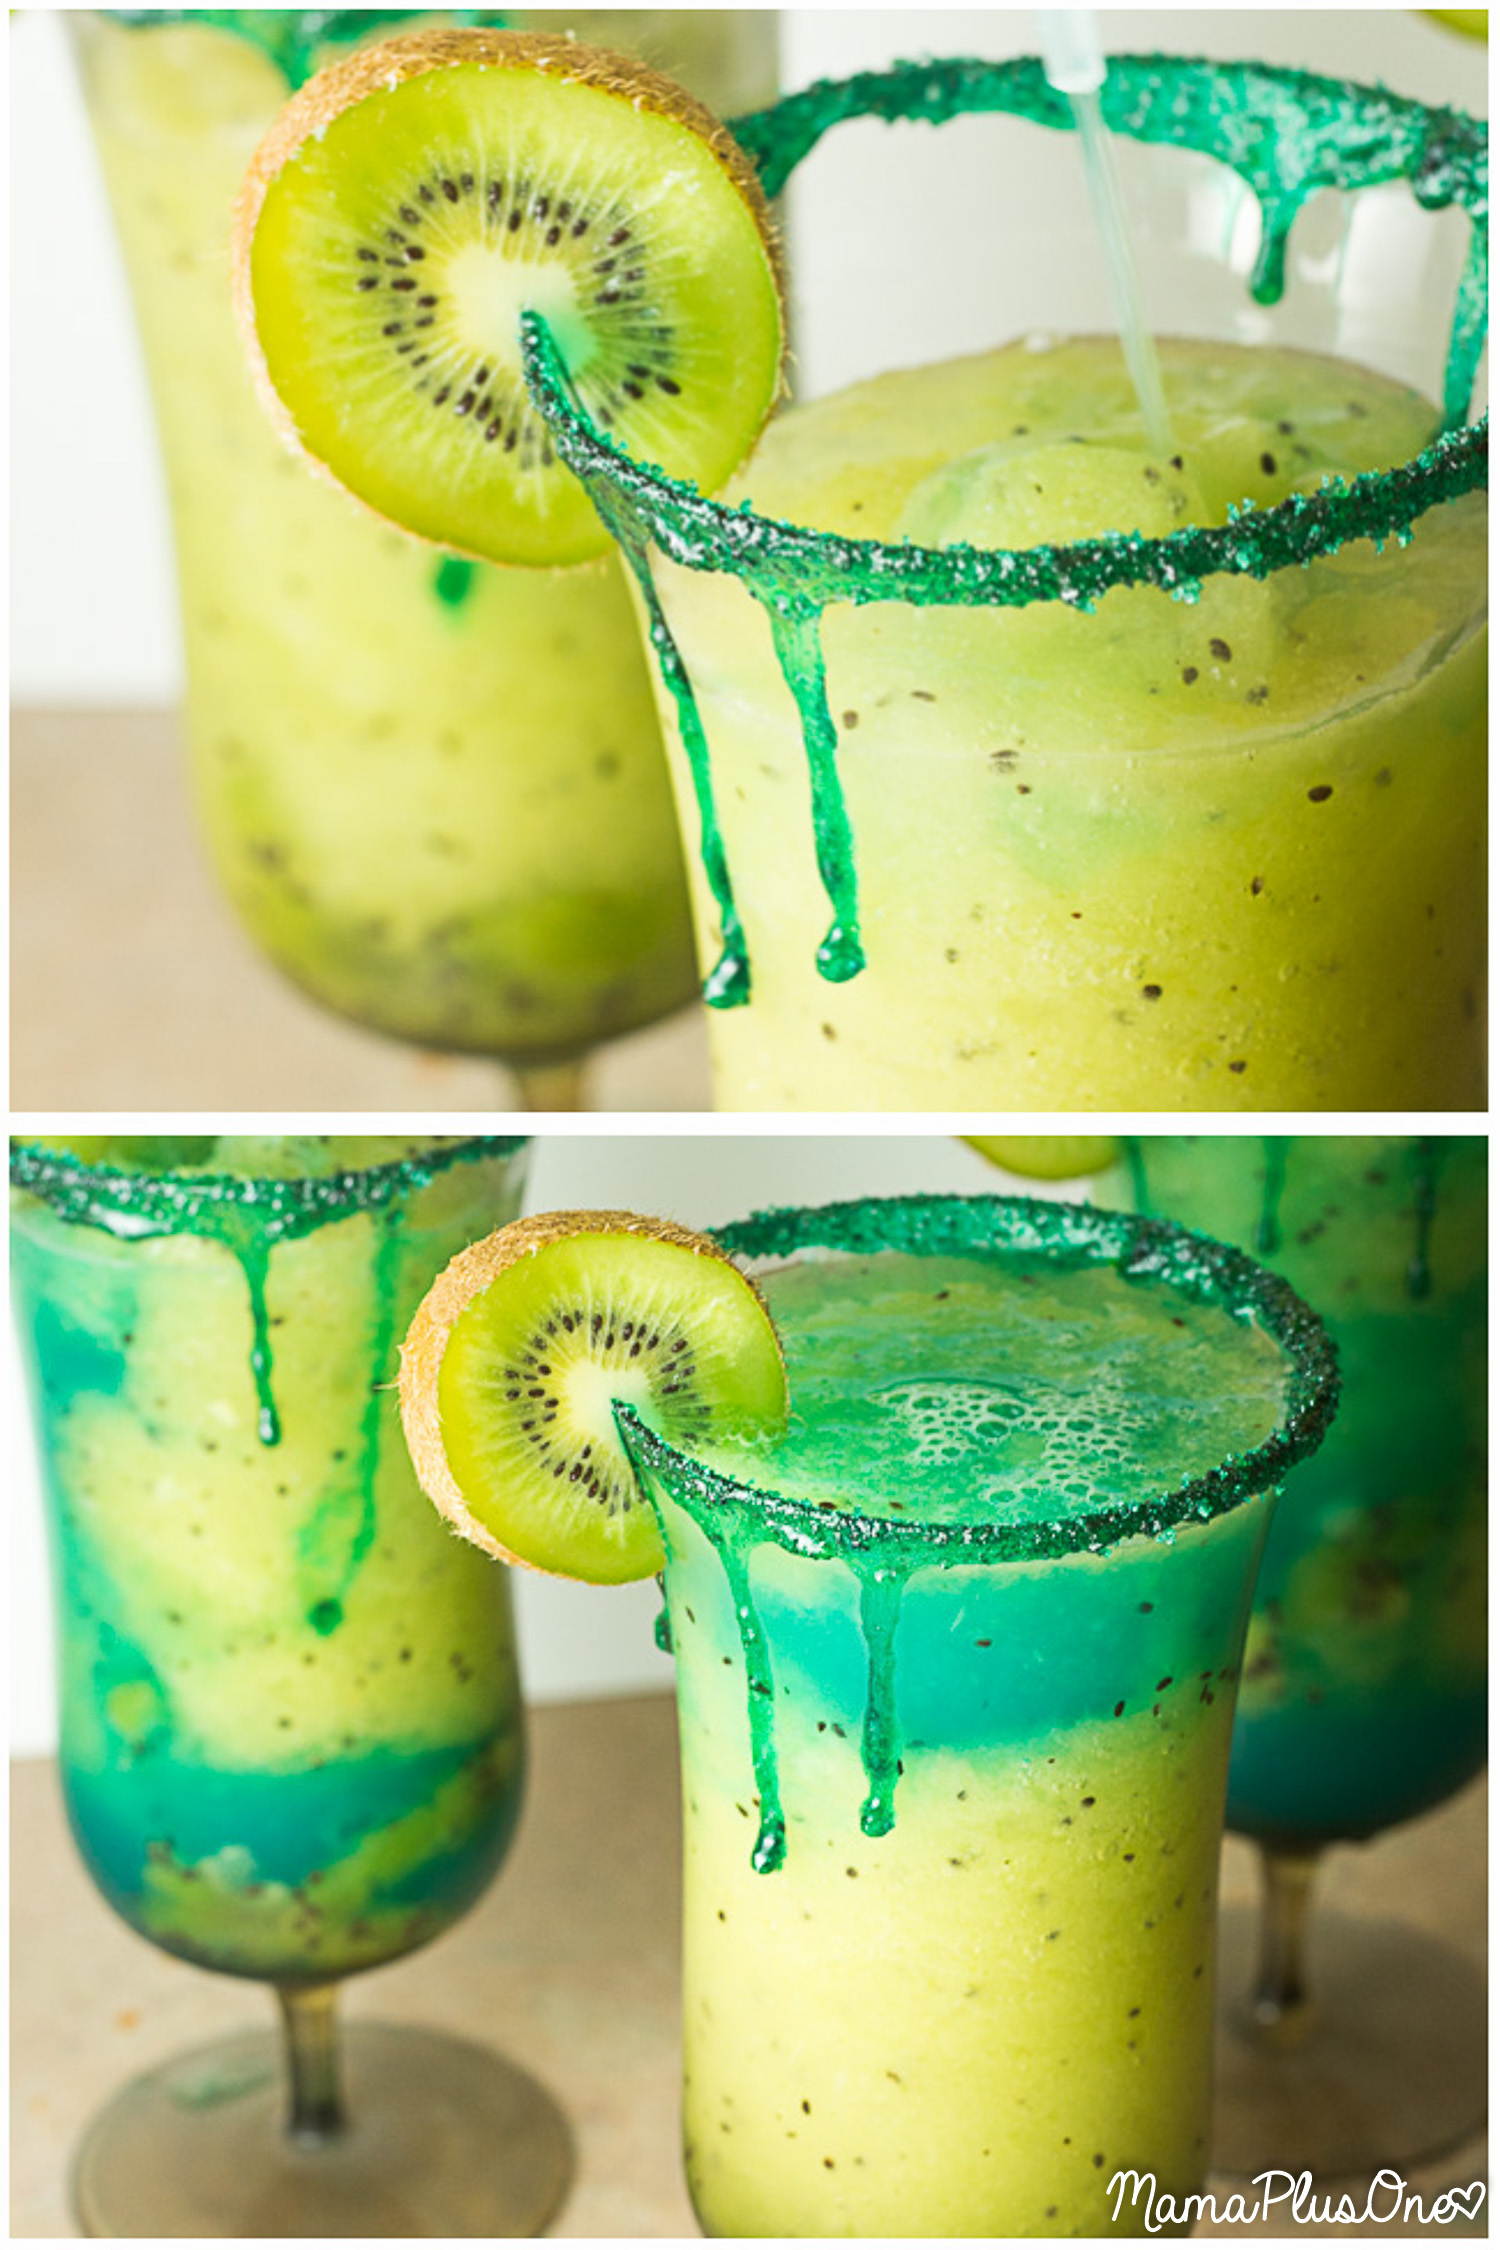 If you want all of the margarita fun and flavor and none of the alcohol, you'll love this totally virgin electric blue kiwi margarita! Hello, spring and summer! This has plenty of flavor-- lime and kiwi, blue and bright green, it's party-ready in no time. Virgin margarita recipe made quickly in your blender!